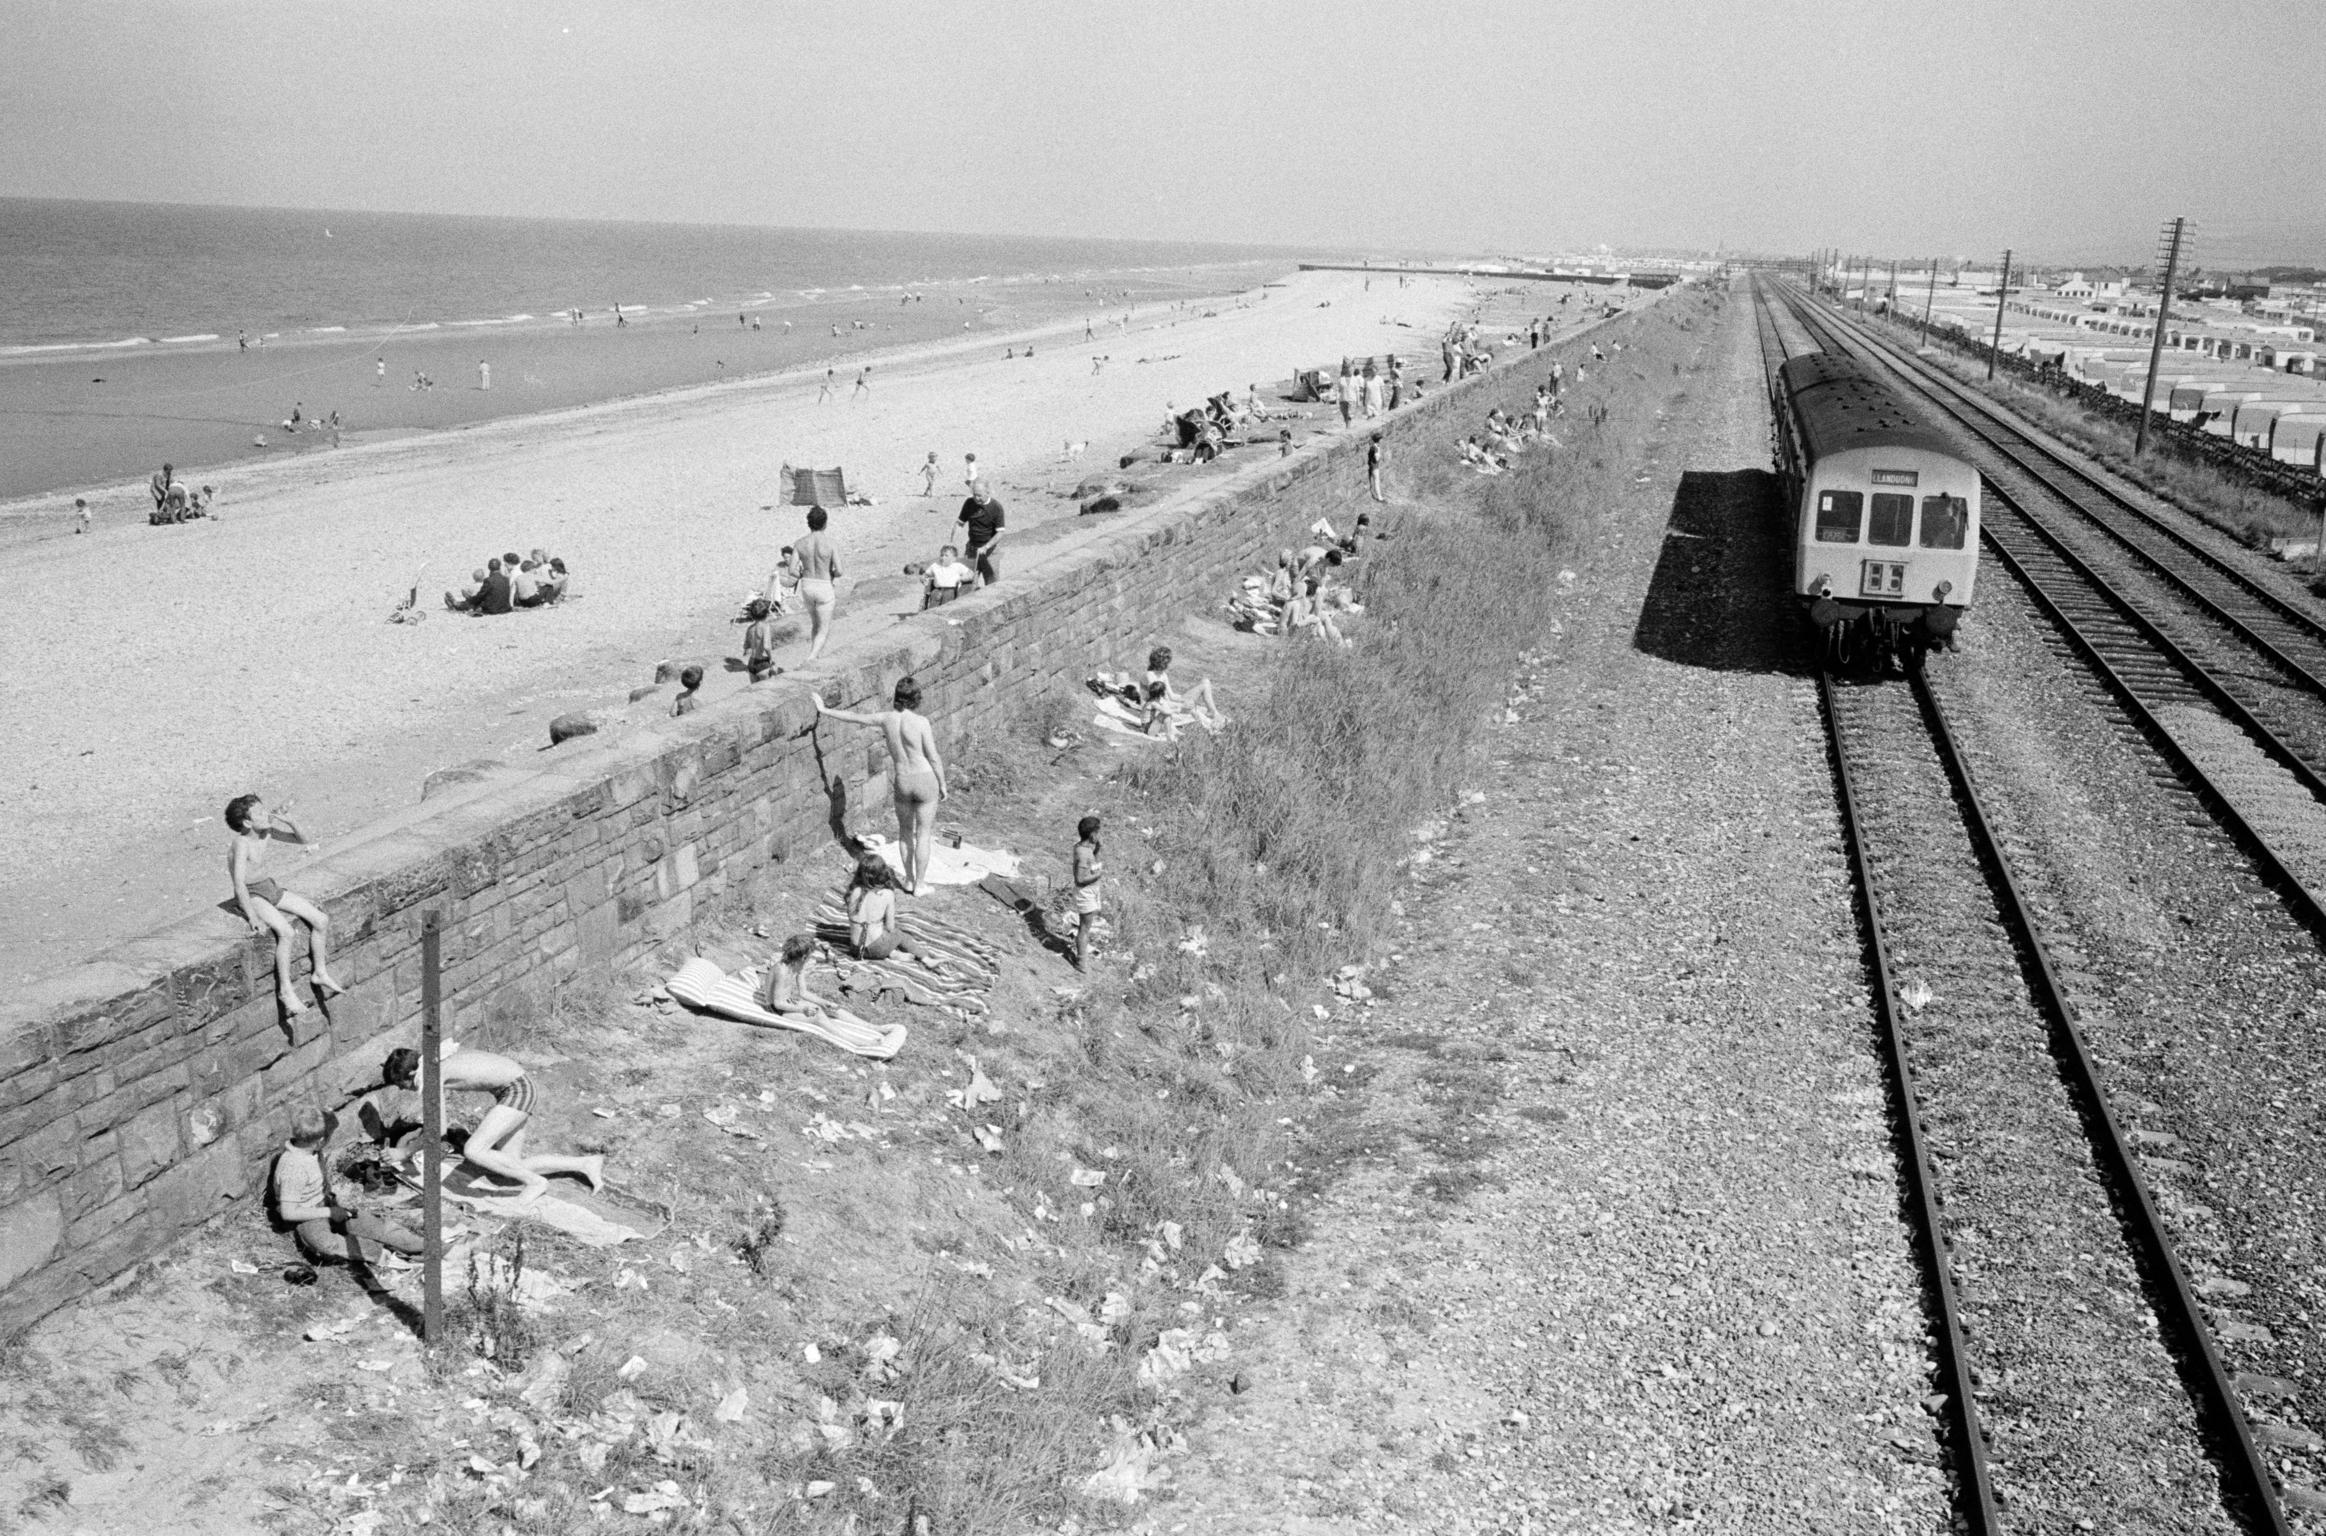 Tourists from the local caravan site shelter from the sea breezes by sun bathing on the railway bankside. Abergele, Wales